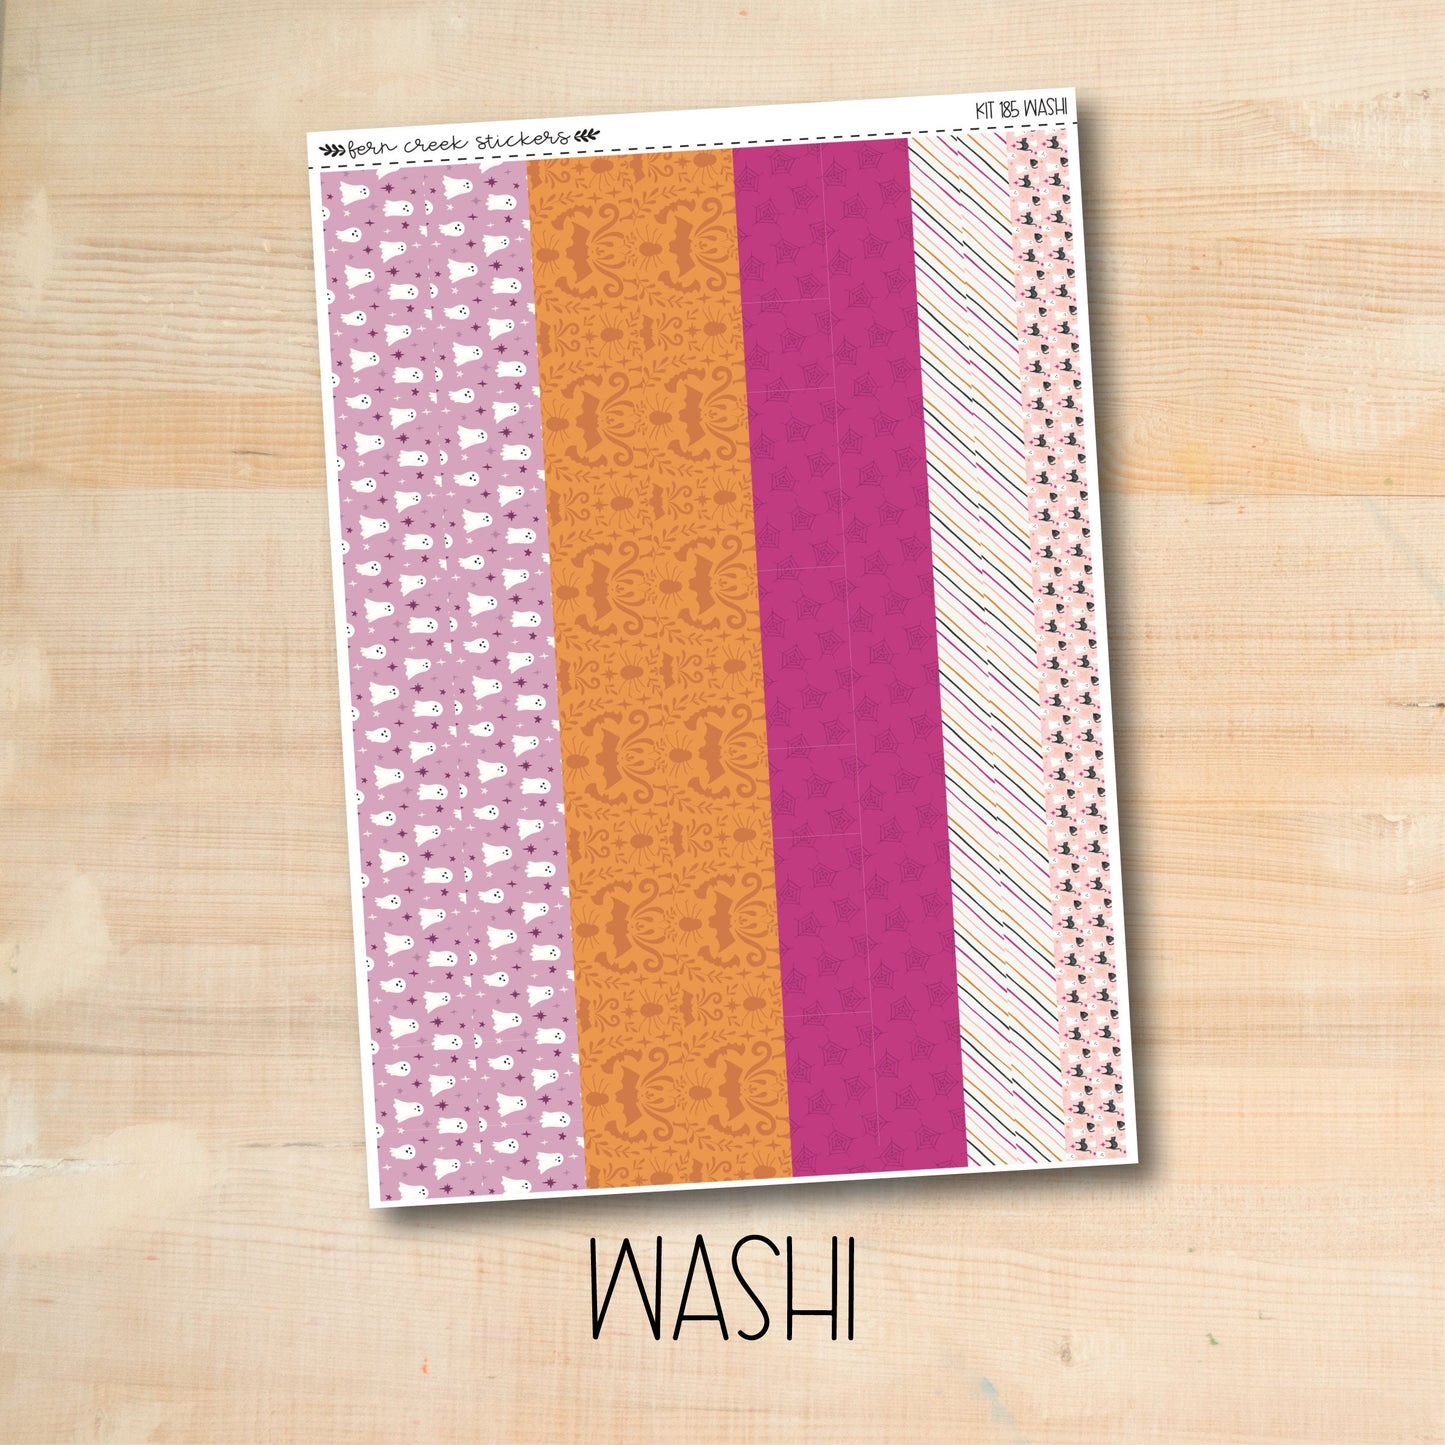 KIT-185 || CUTE HALLOWEEN weekly planner kit for Erin Condren, Plum Paper, MakseLife and more!